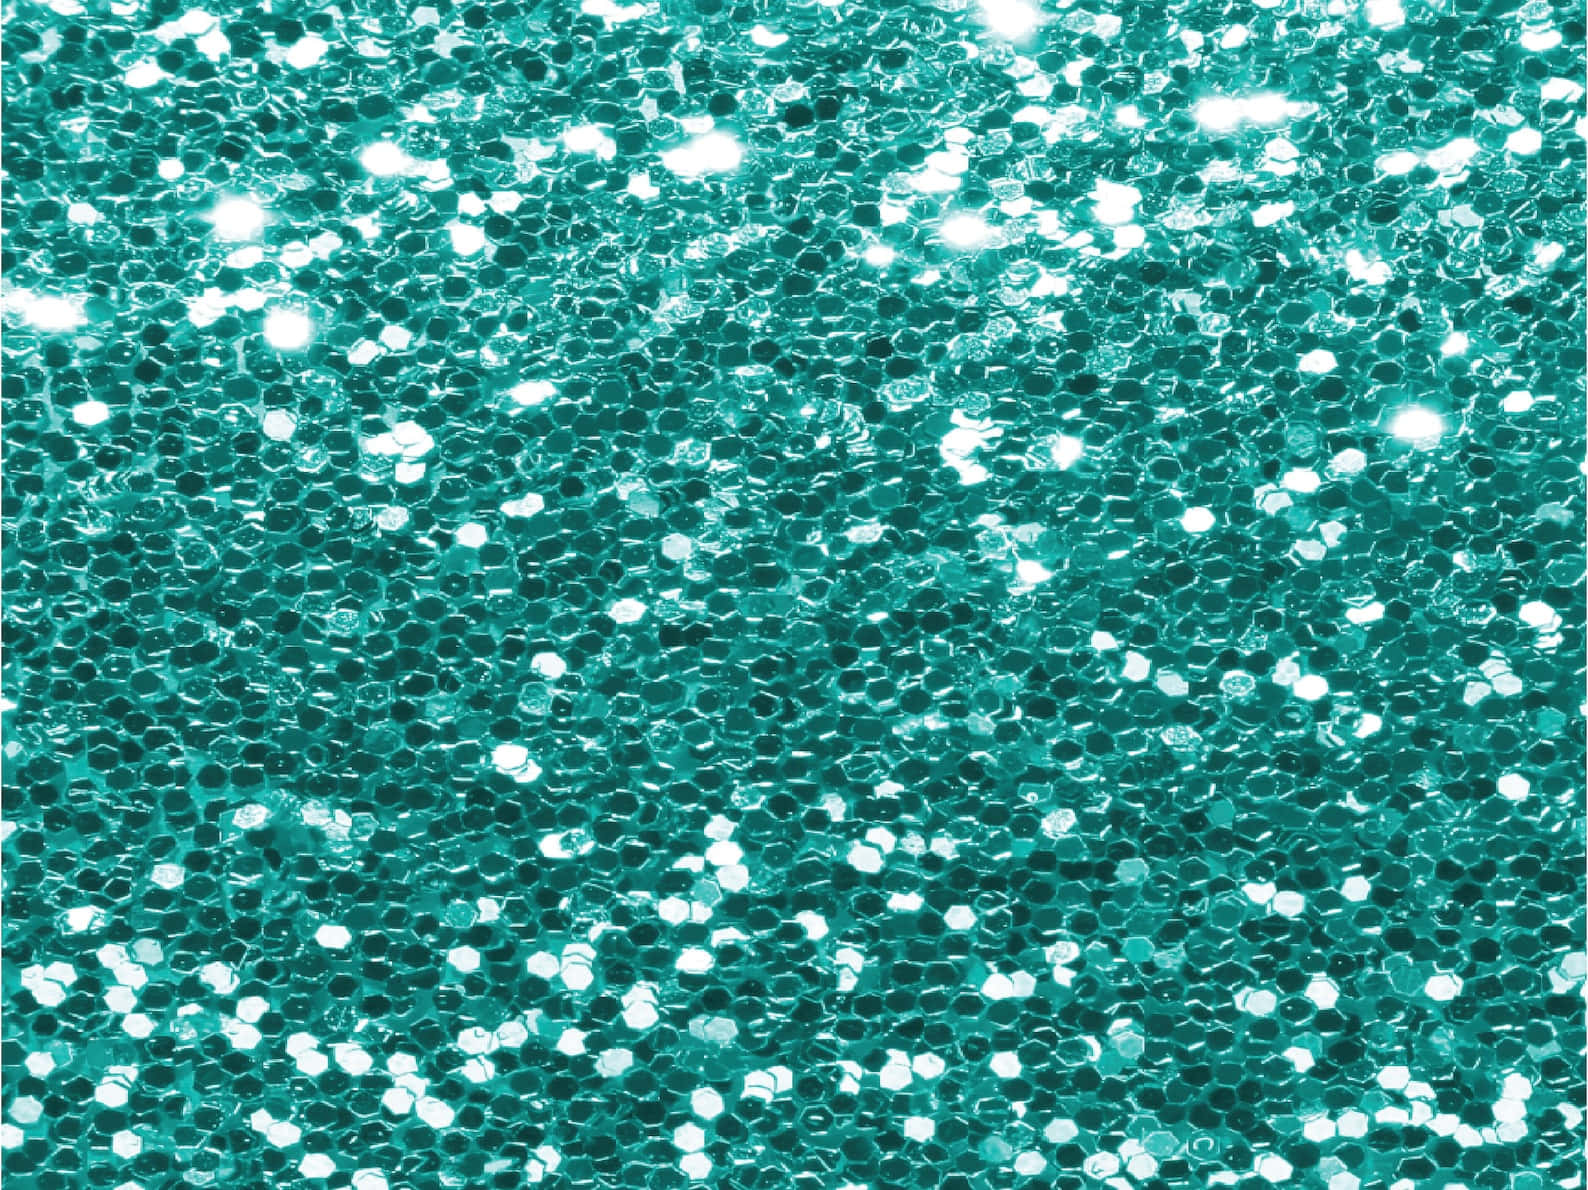 A Teal Glitter Background With White Glitter